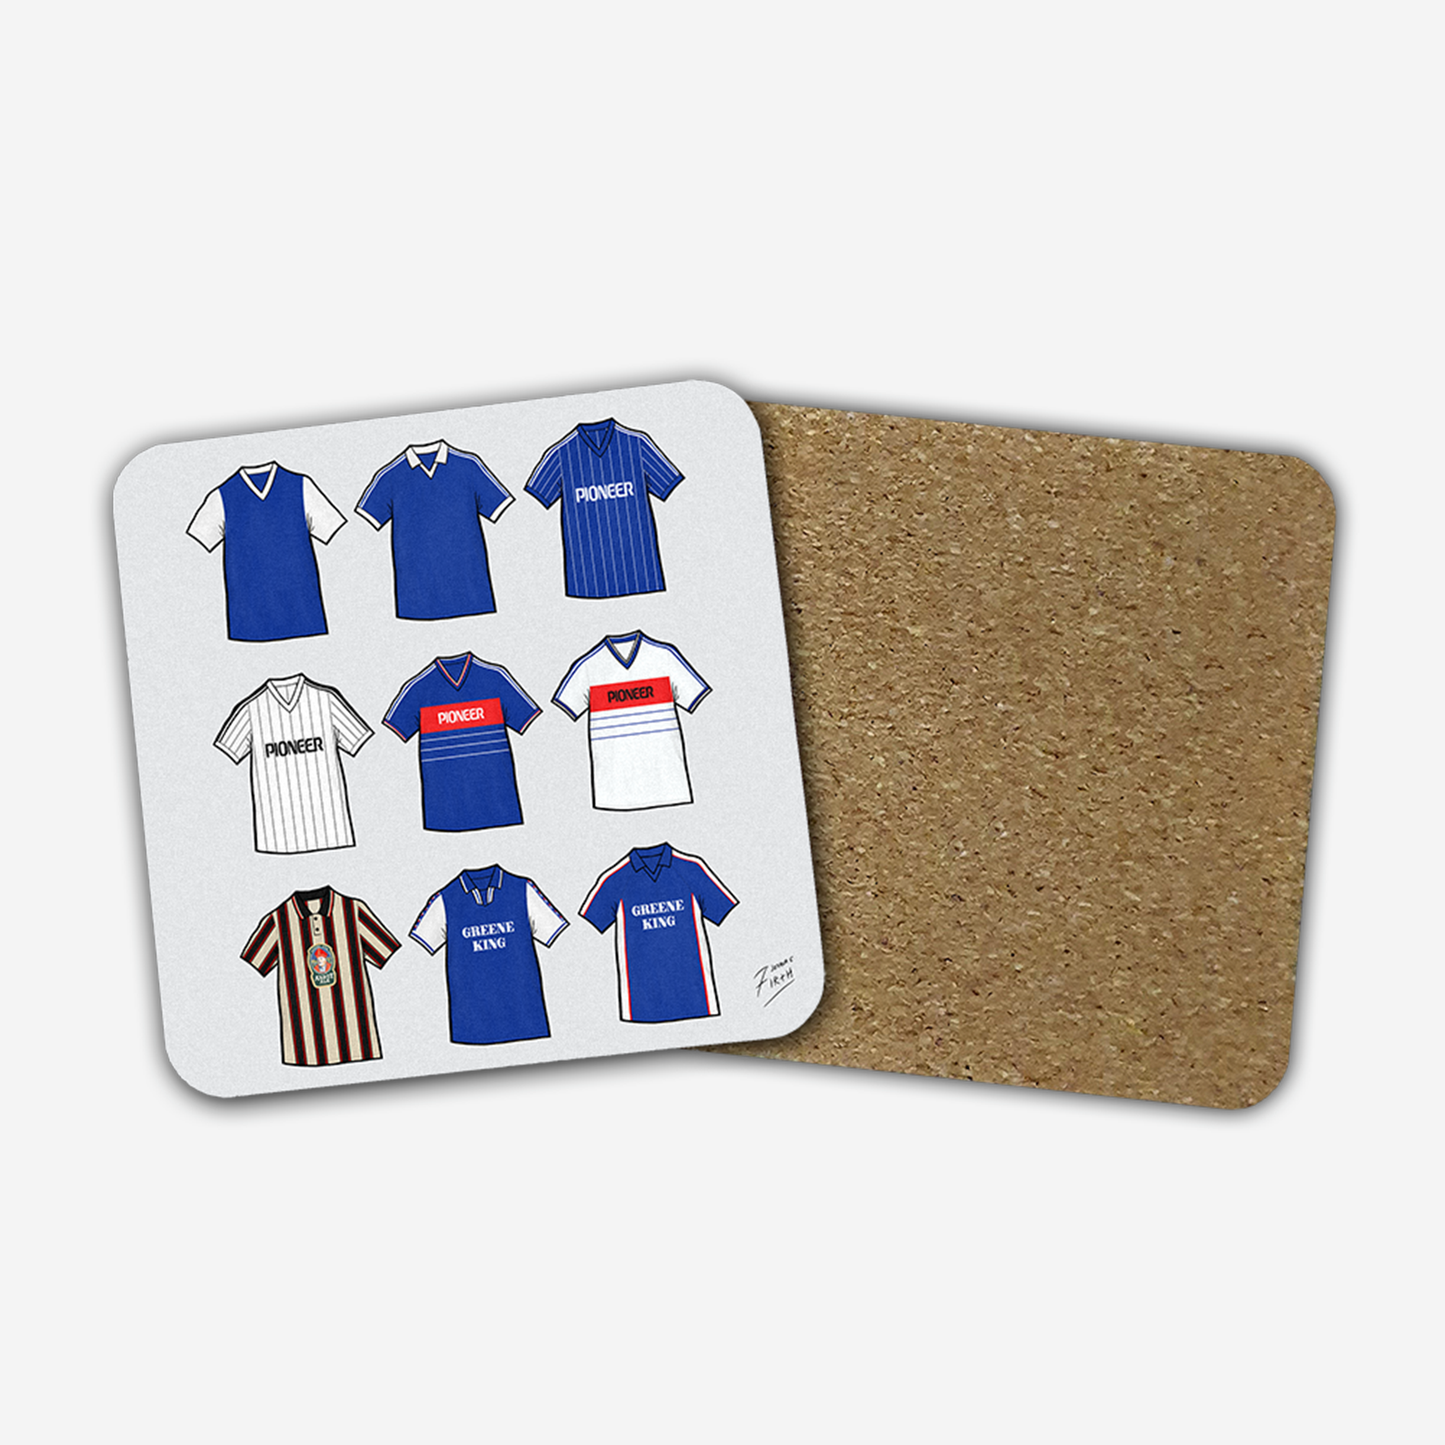 9 shirts artwork coaster featuring shirts from Ipswich Town Football Club's famous past